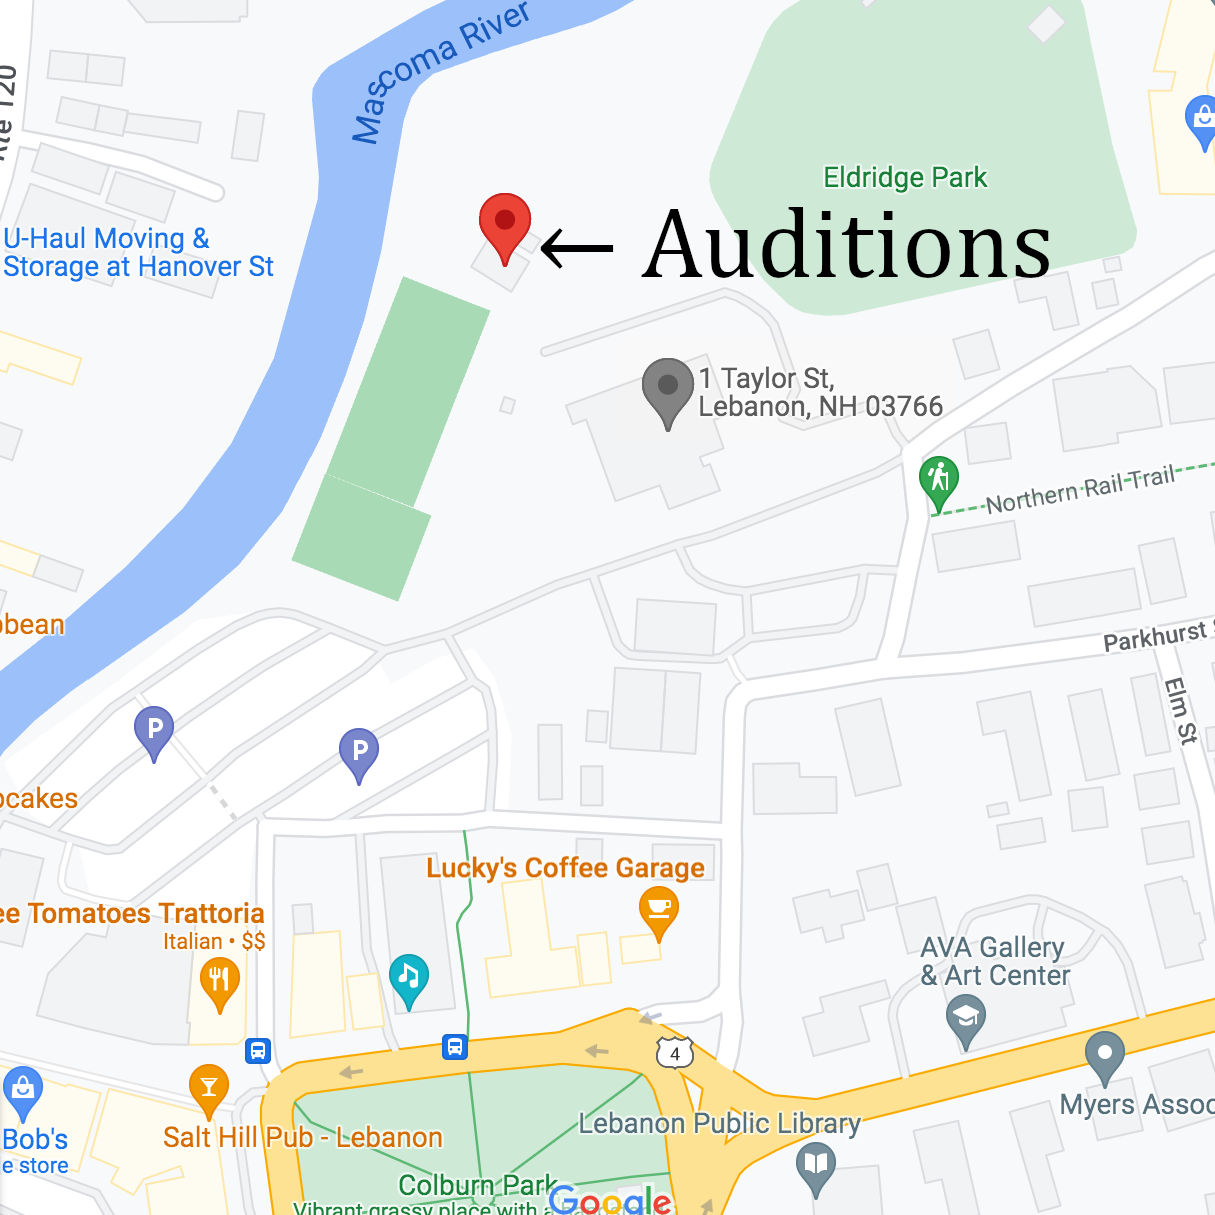 Map to Valley Improv auditions